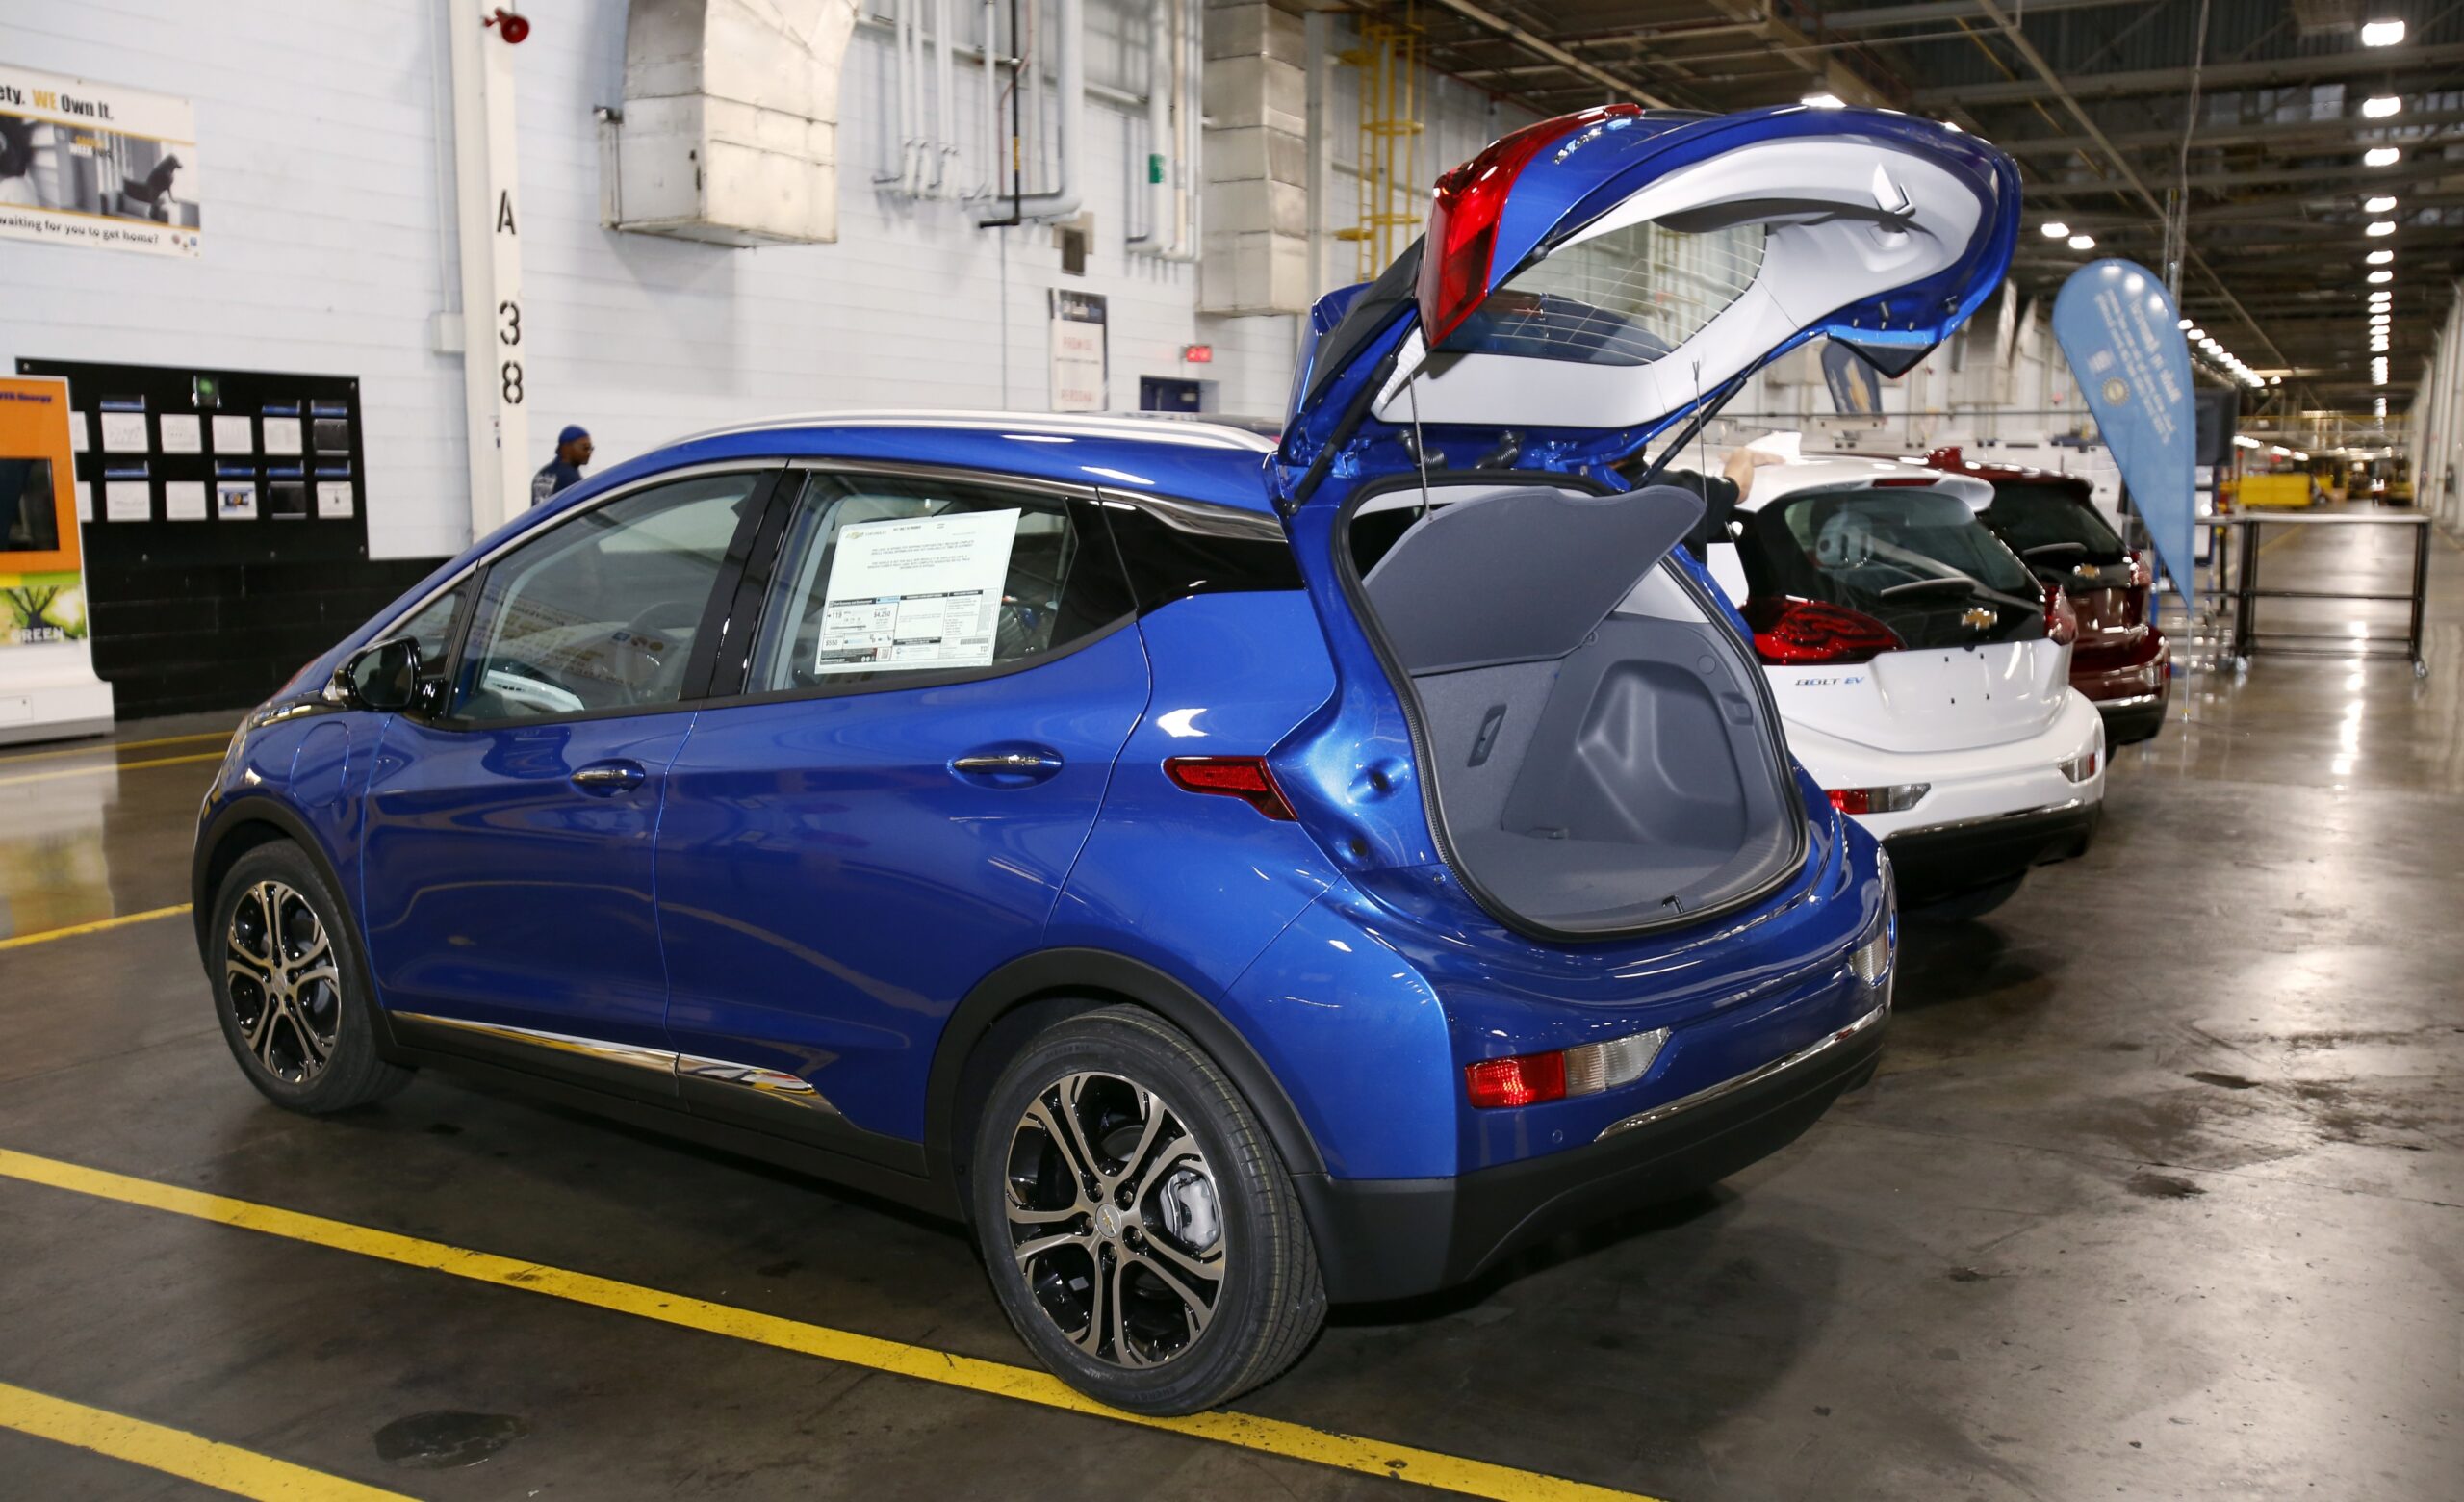 Forum Speakers Forecast Growth For Electric Vehicle Industry